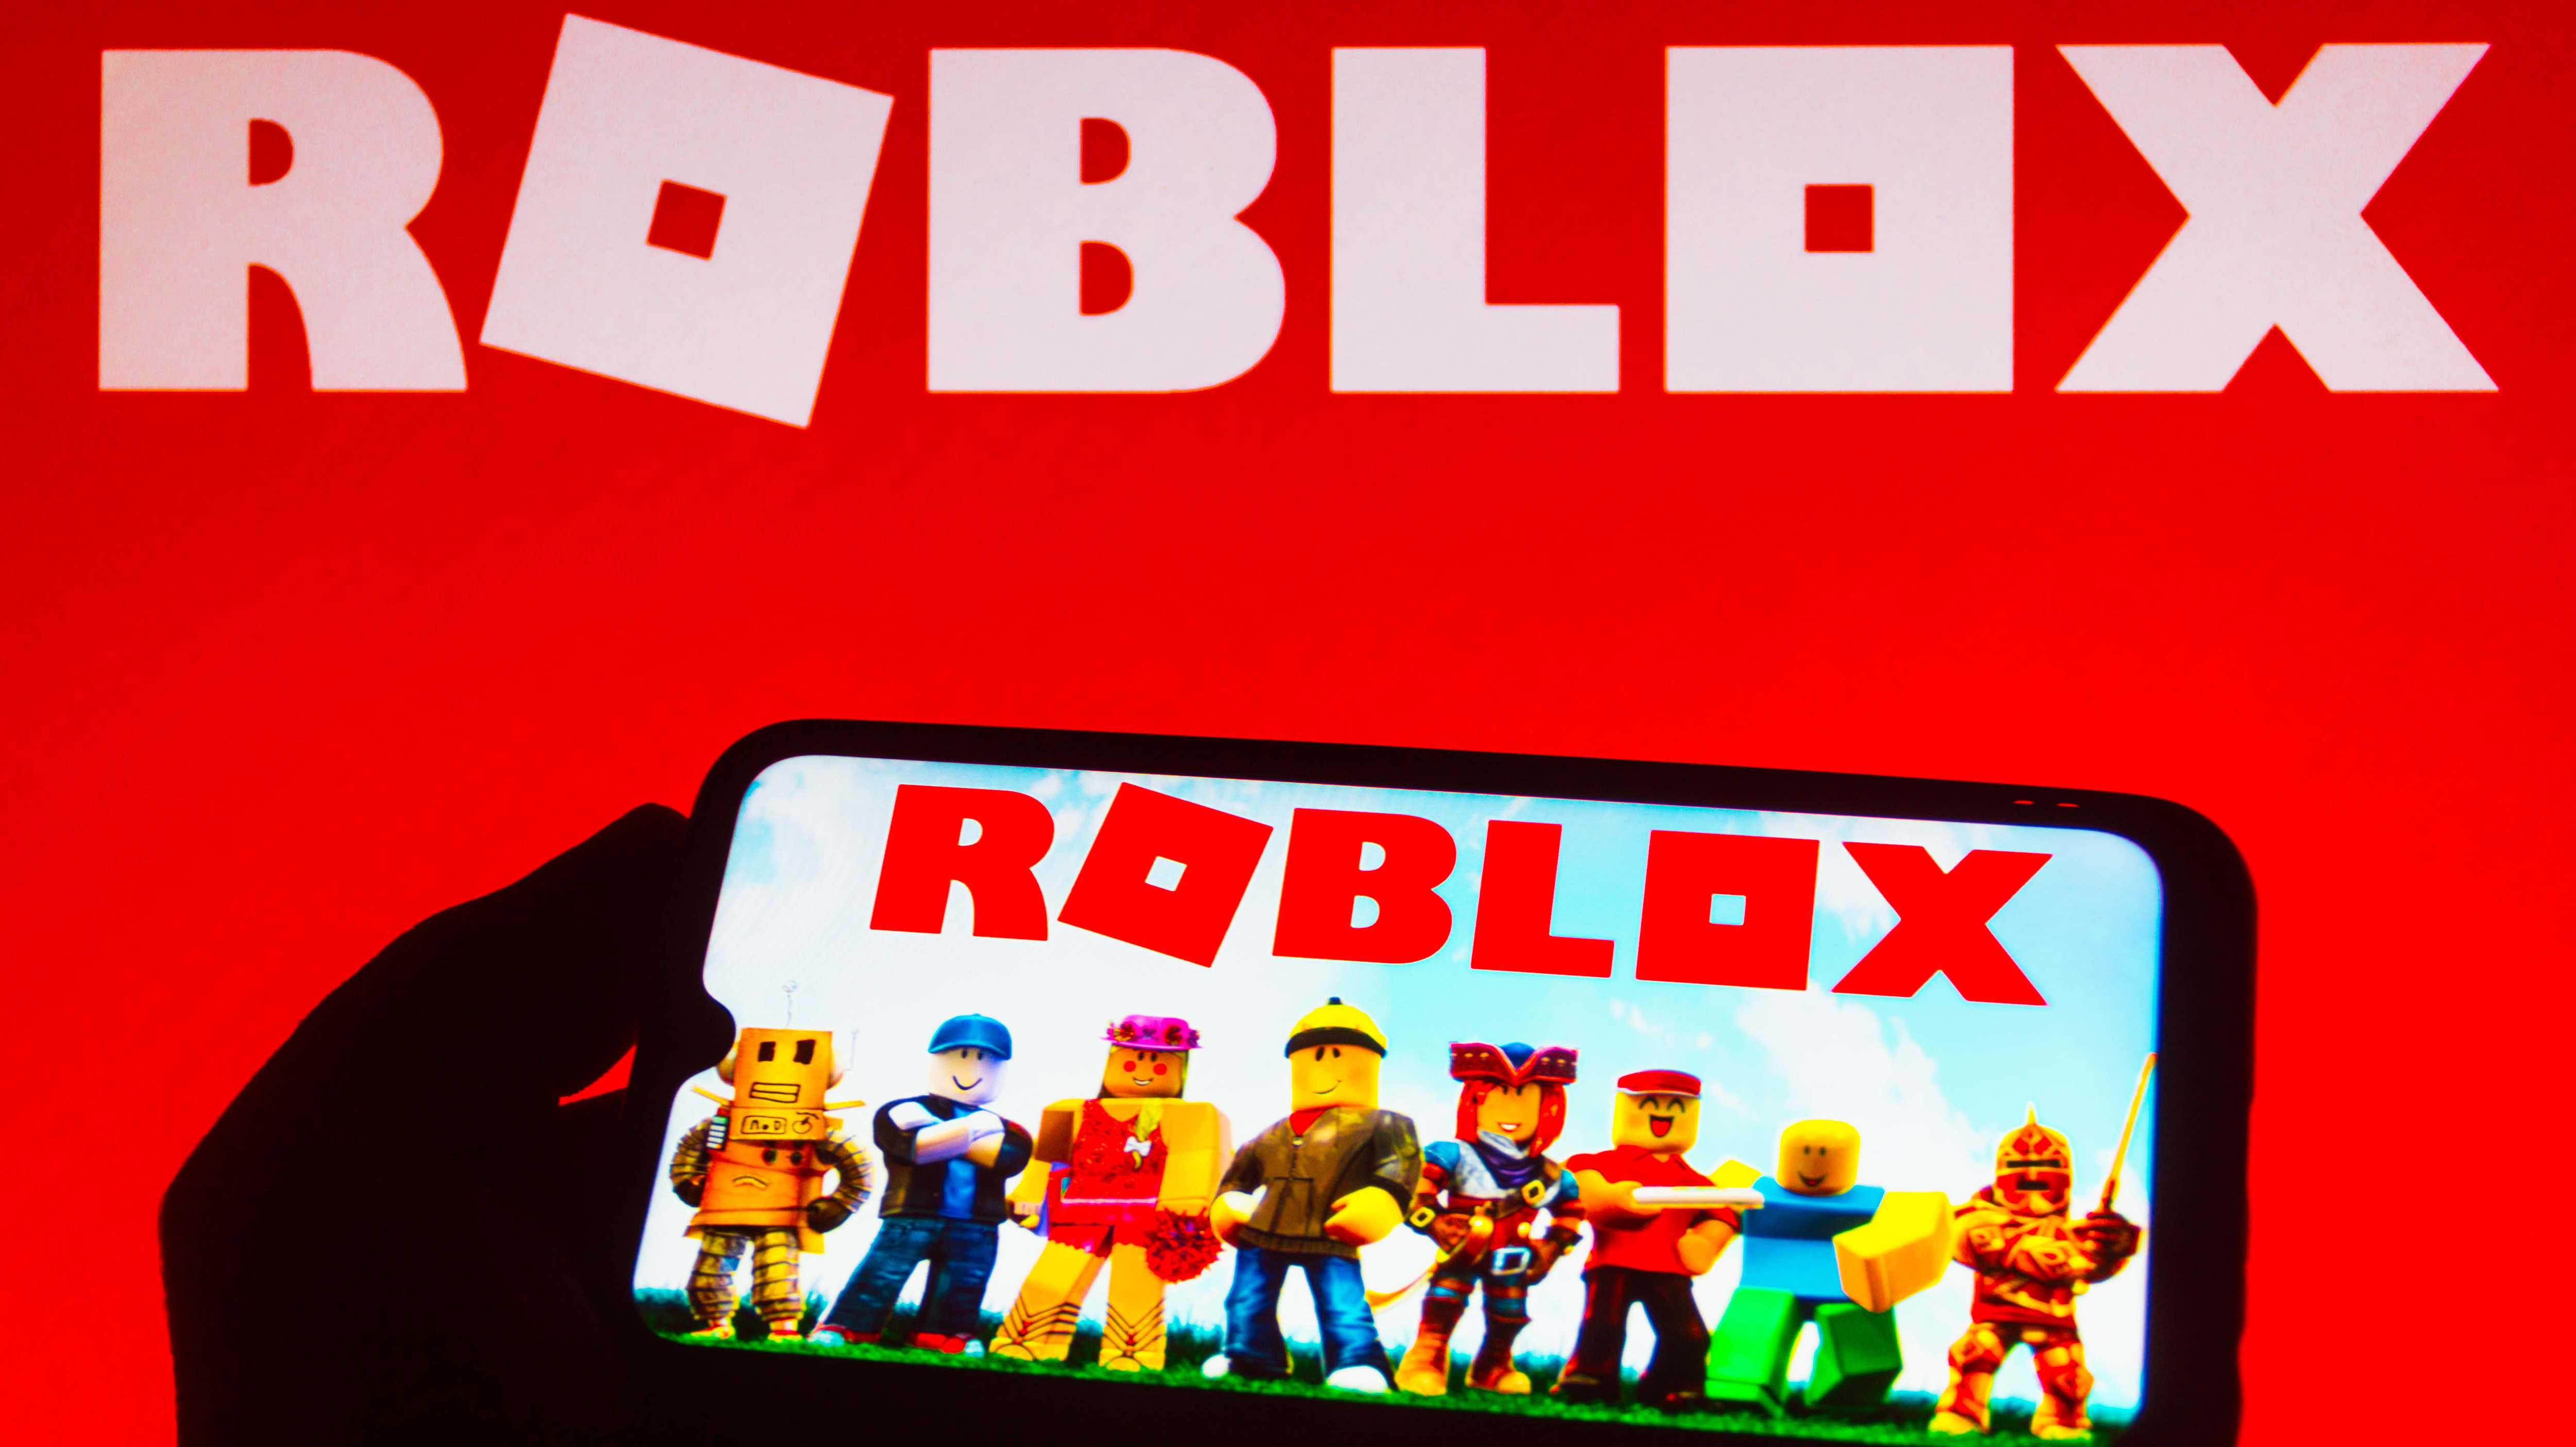 Roblox beats bookings estimates on higher in-game spending, shares